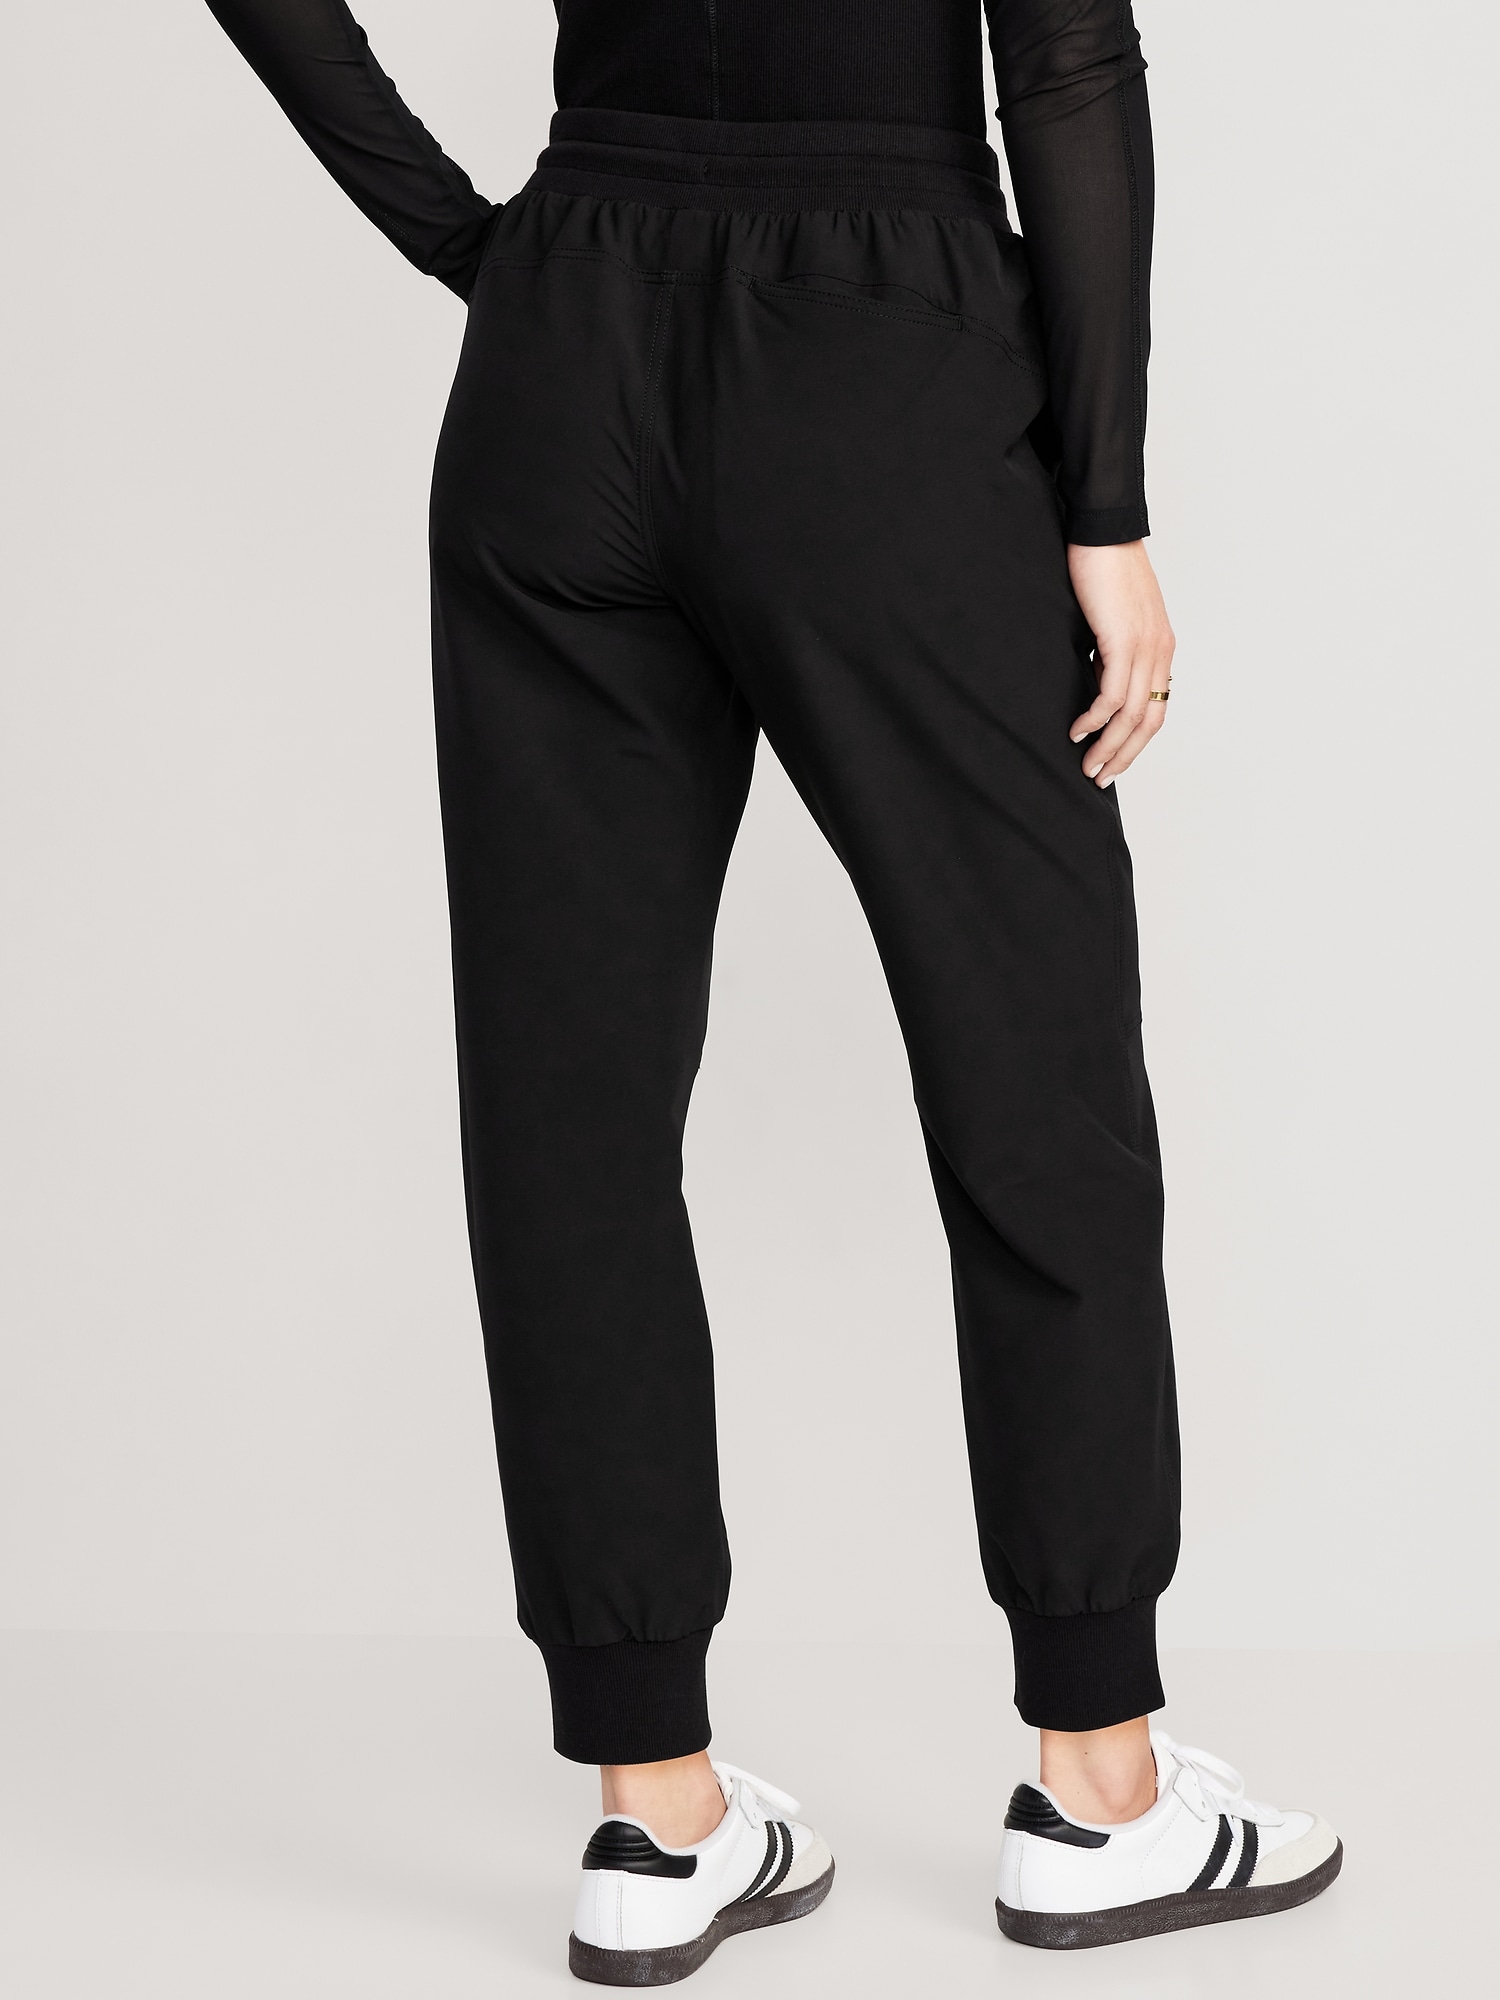 YPB your personal best Women's Black Ultra High Rise Jogger Pants